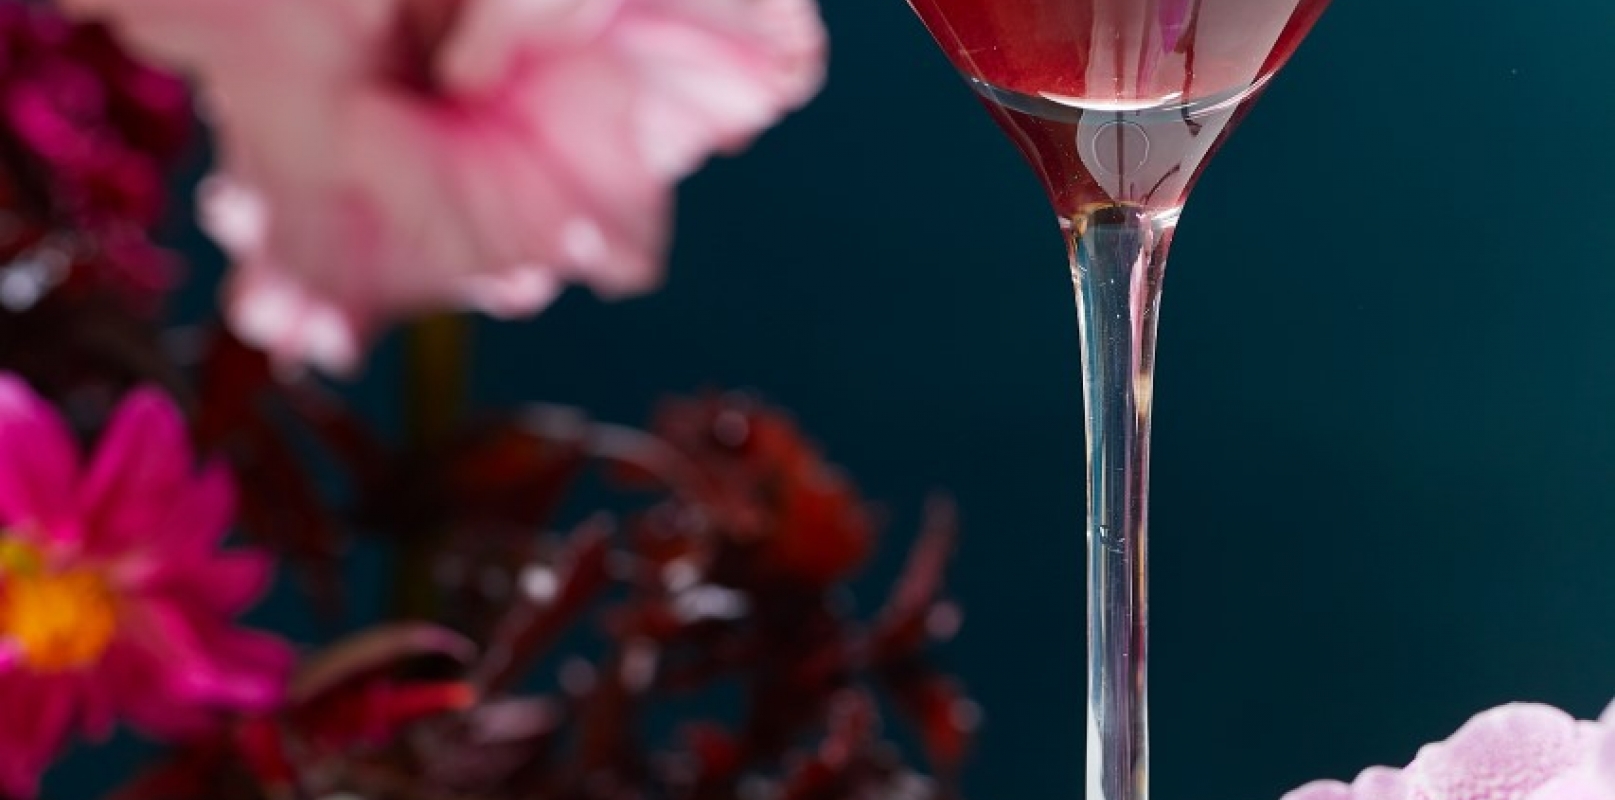 red cocktail in a martini glass sitting beside multiple pink flowers